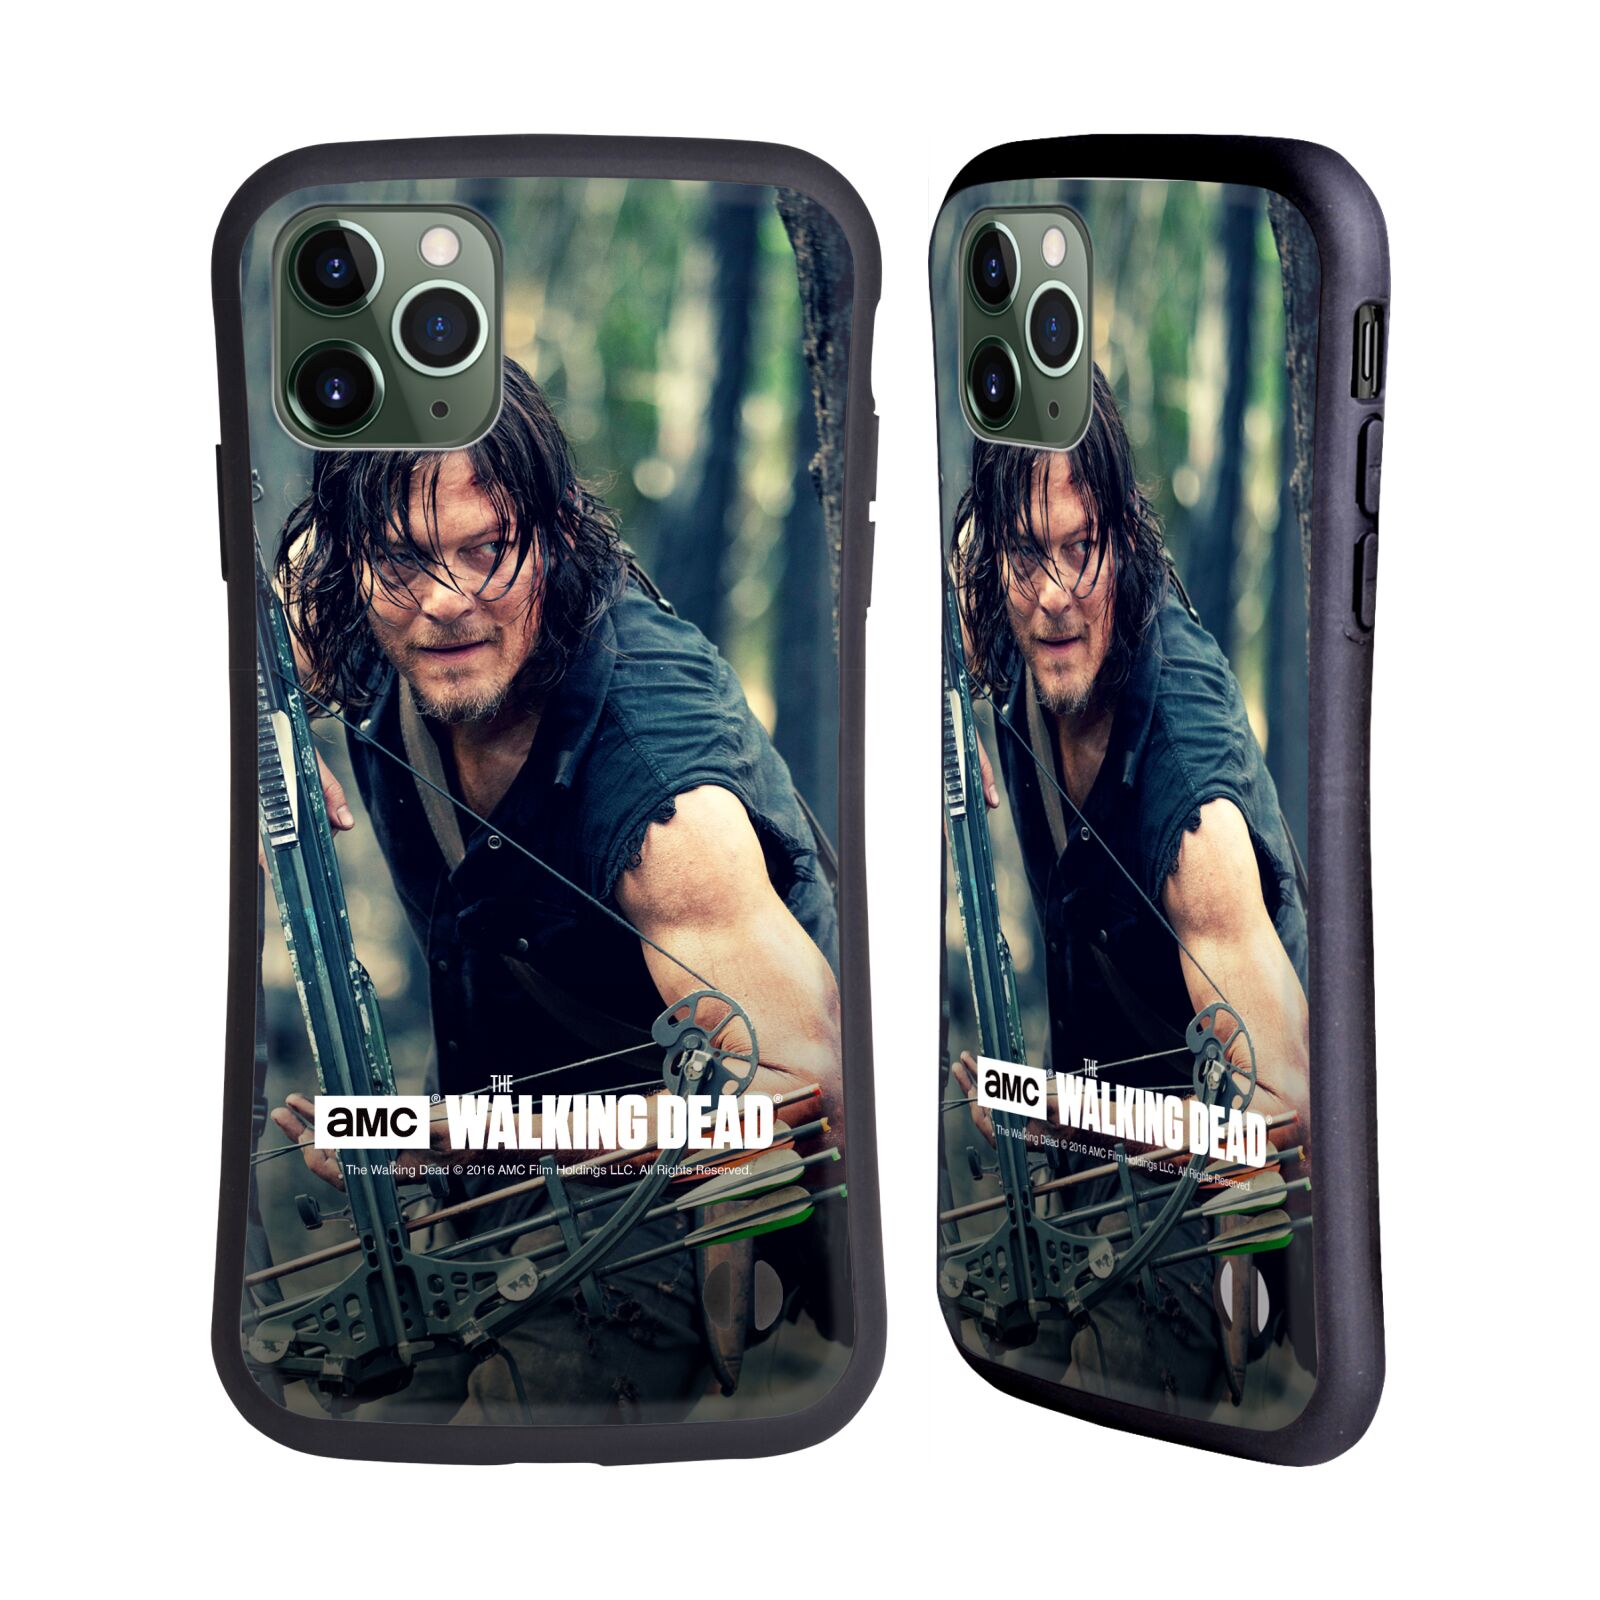 OFFICIAL AMC THE WALKING DEAD DARYL DIXON HYBRID CASE FOR SAMSUNG